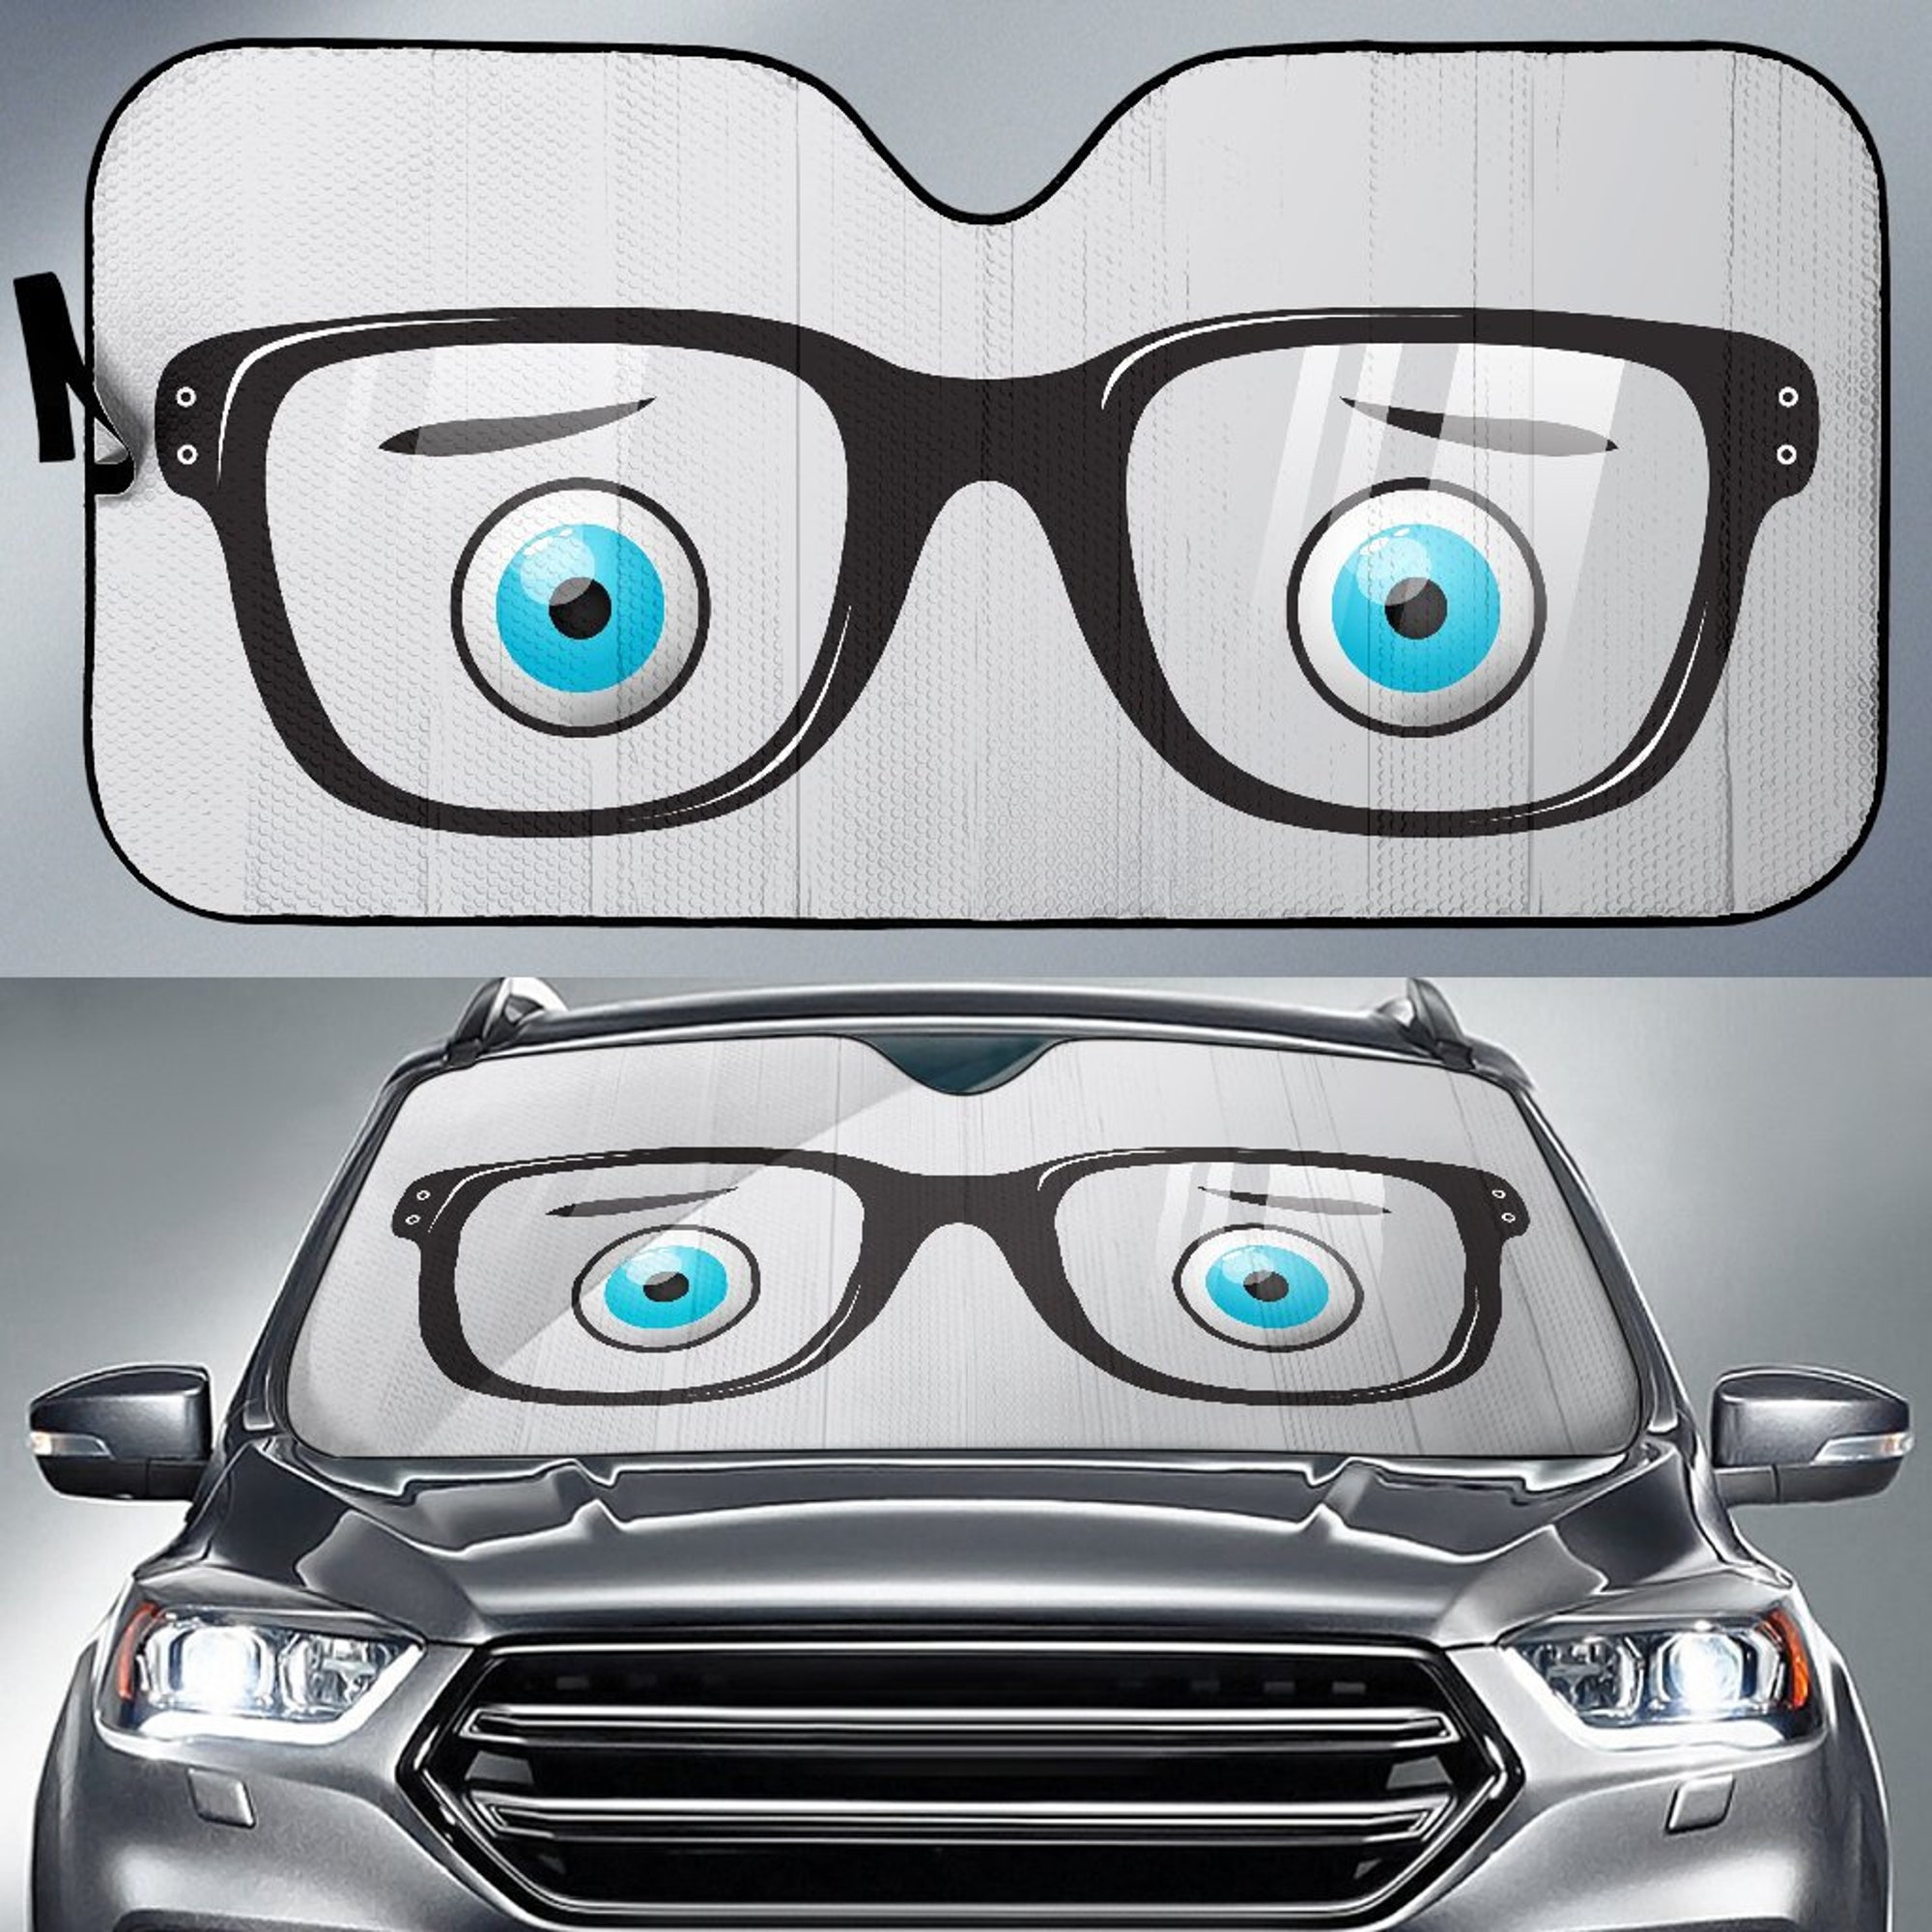 Discover Worried Eyes With Glasses Car Sunshade